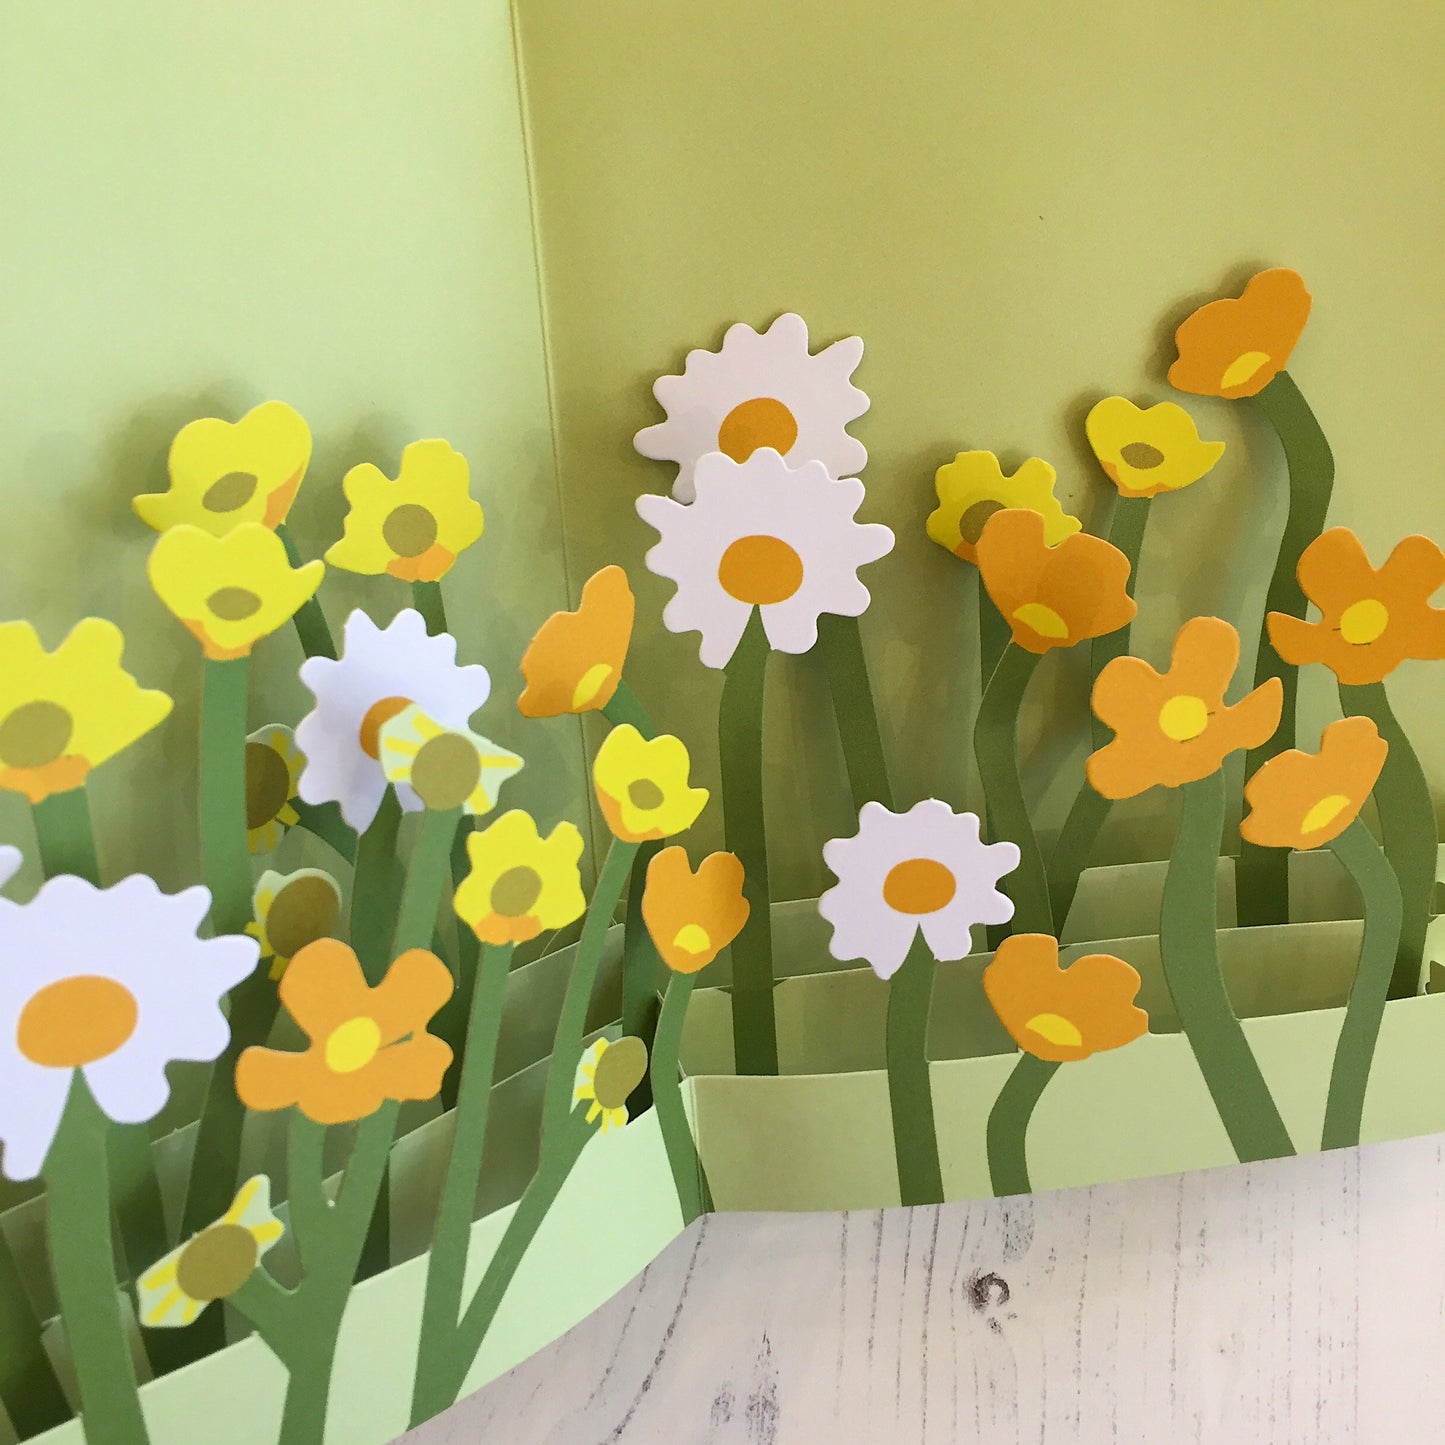 Pop Up 3D Field of Daisies Card by Two To Tango